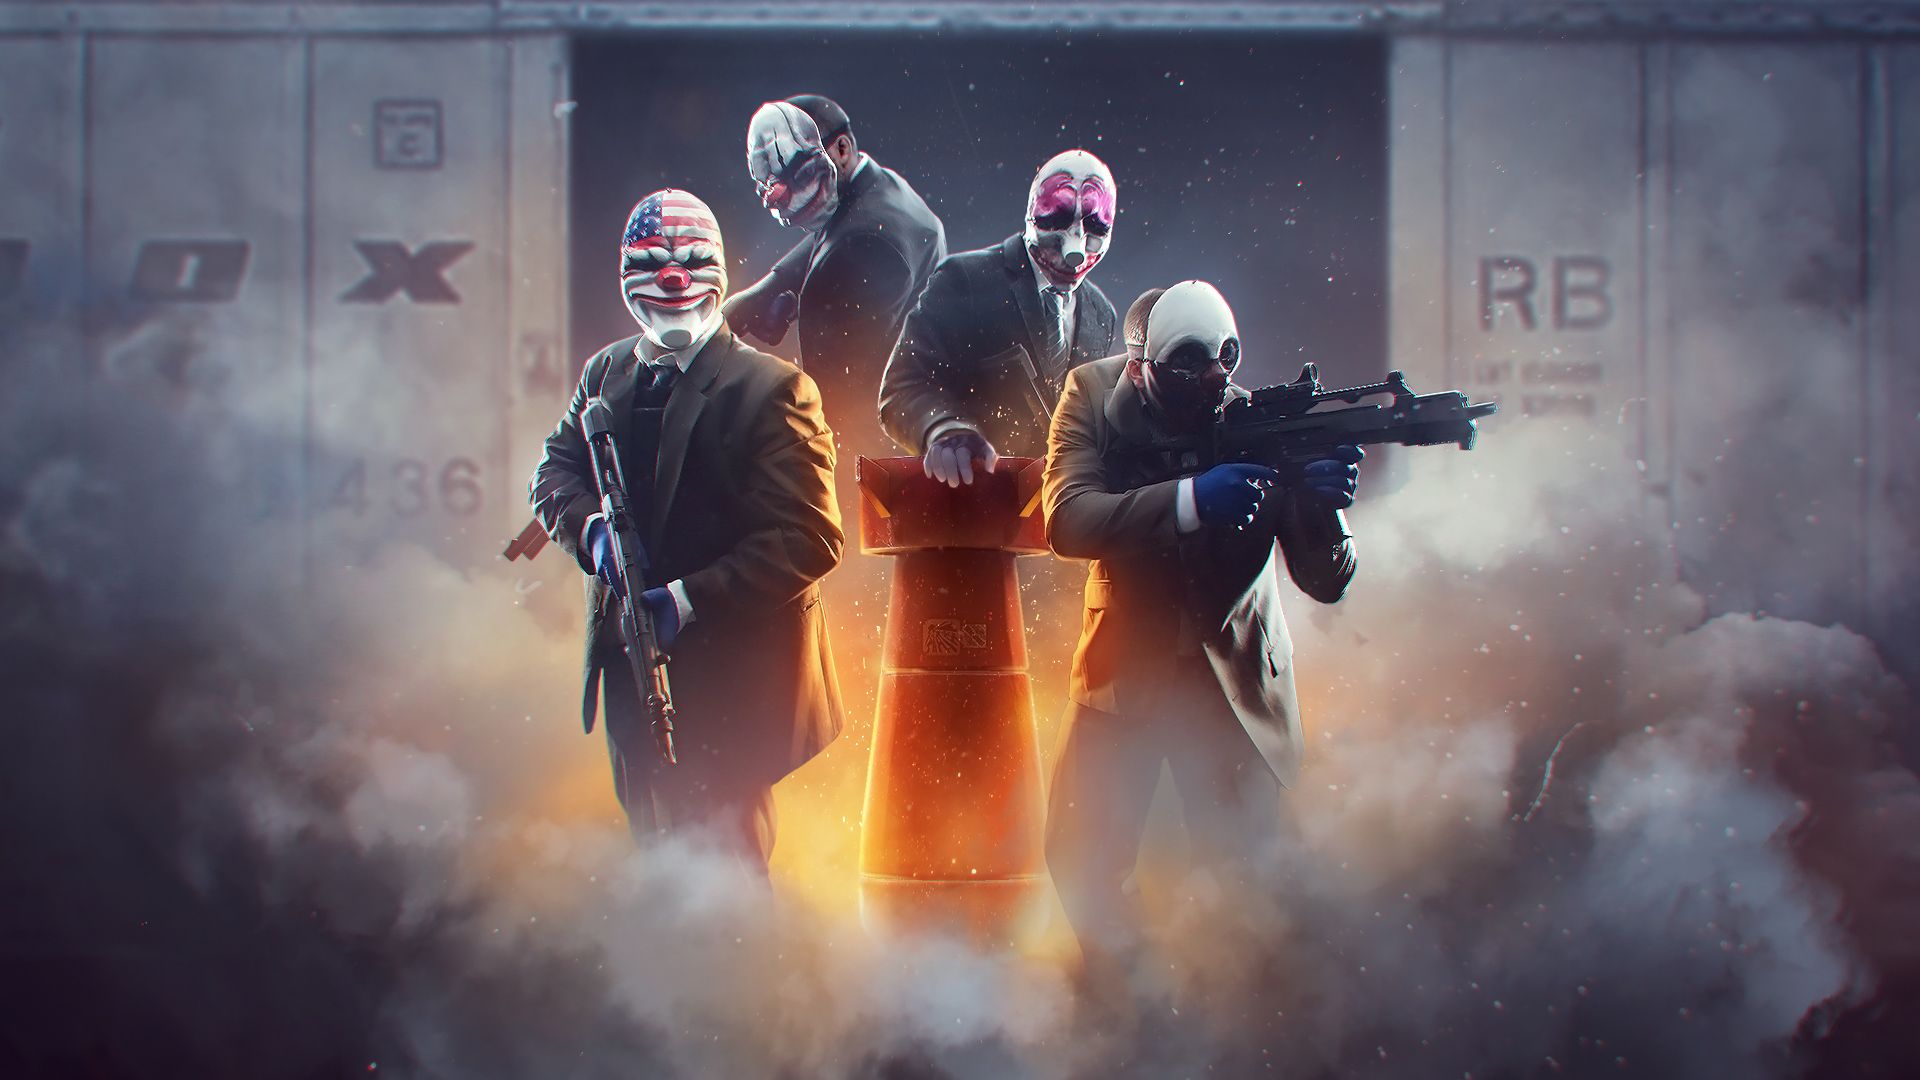 will there be a payday 3